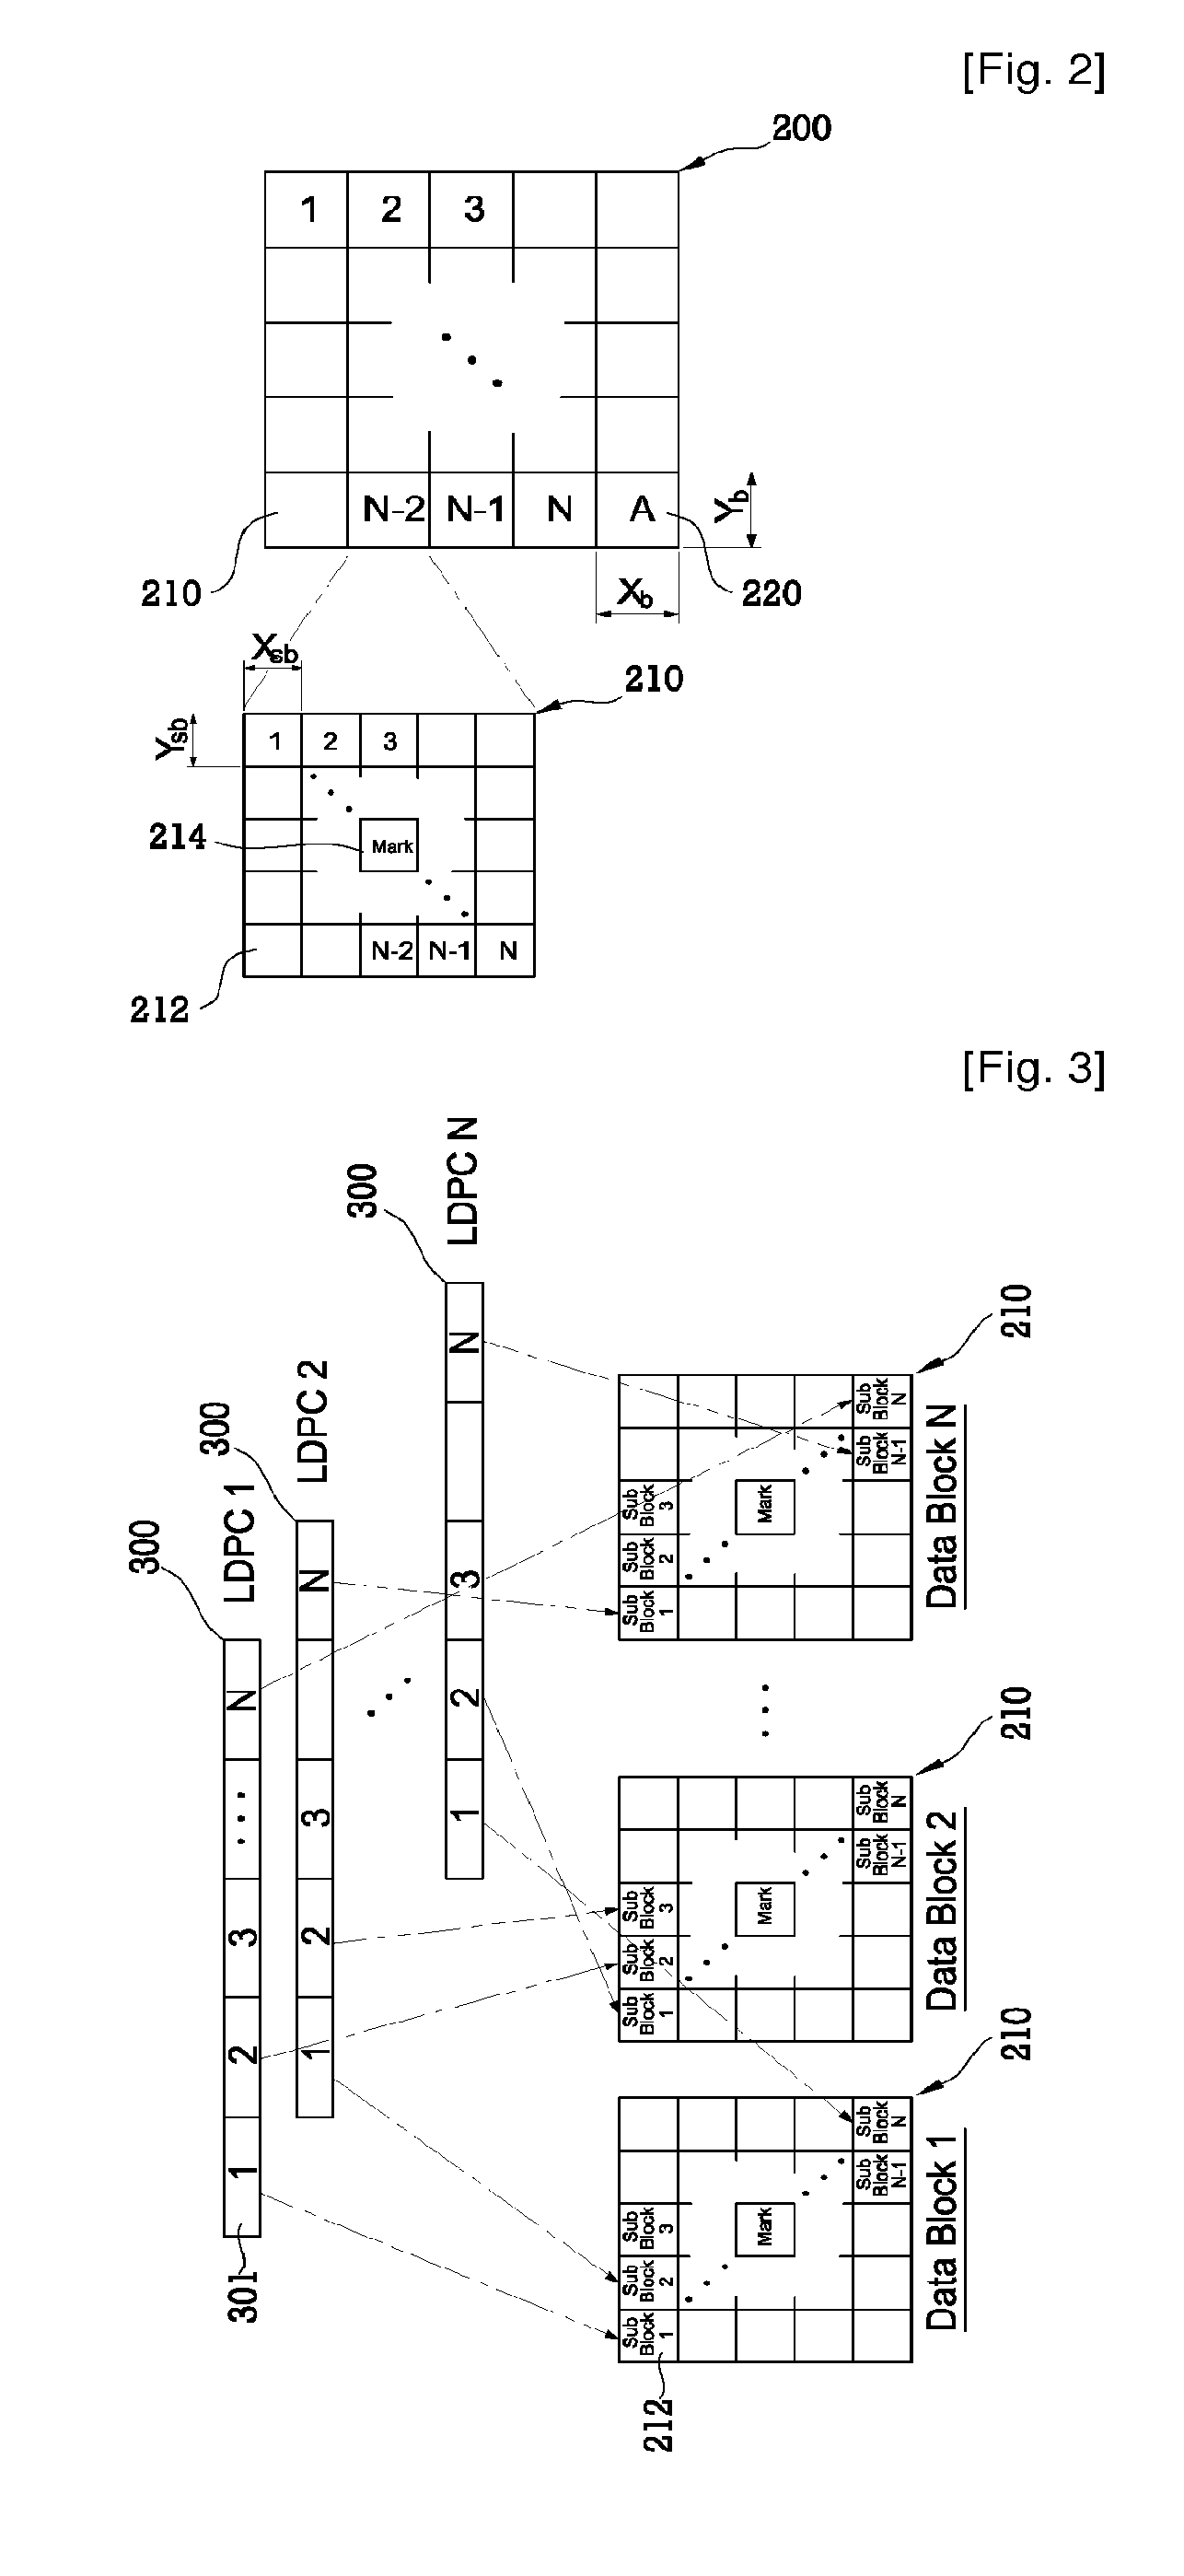 Apparatus and method for processing beam information using low density parity check code